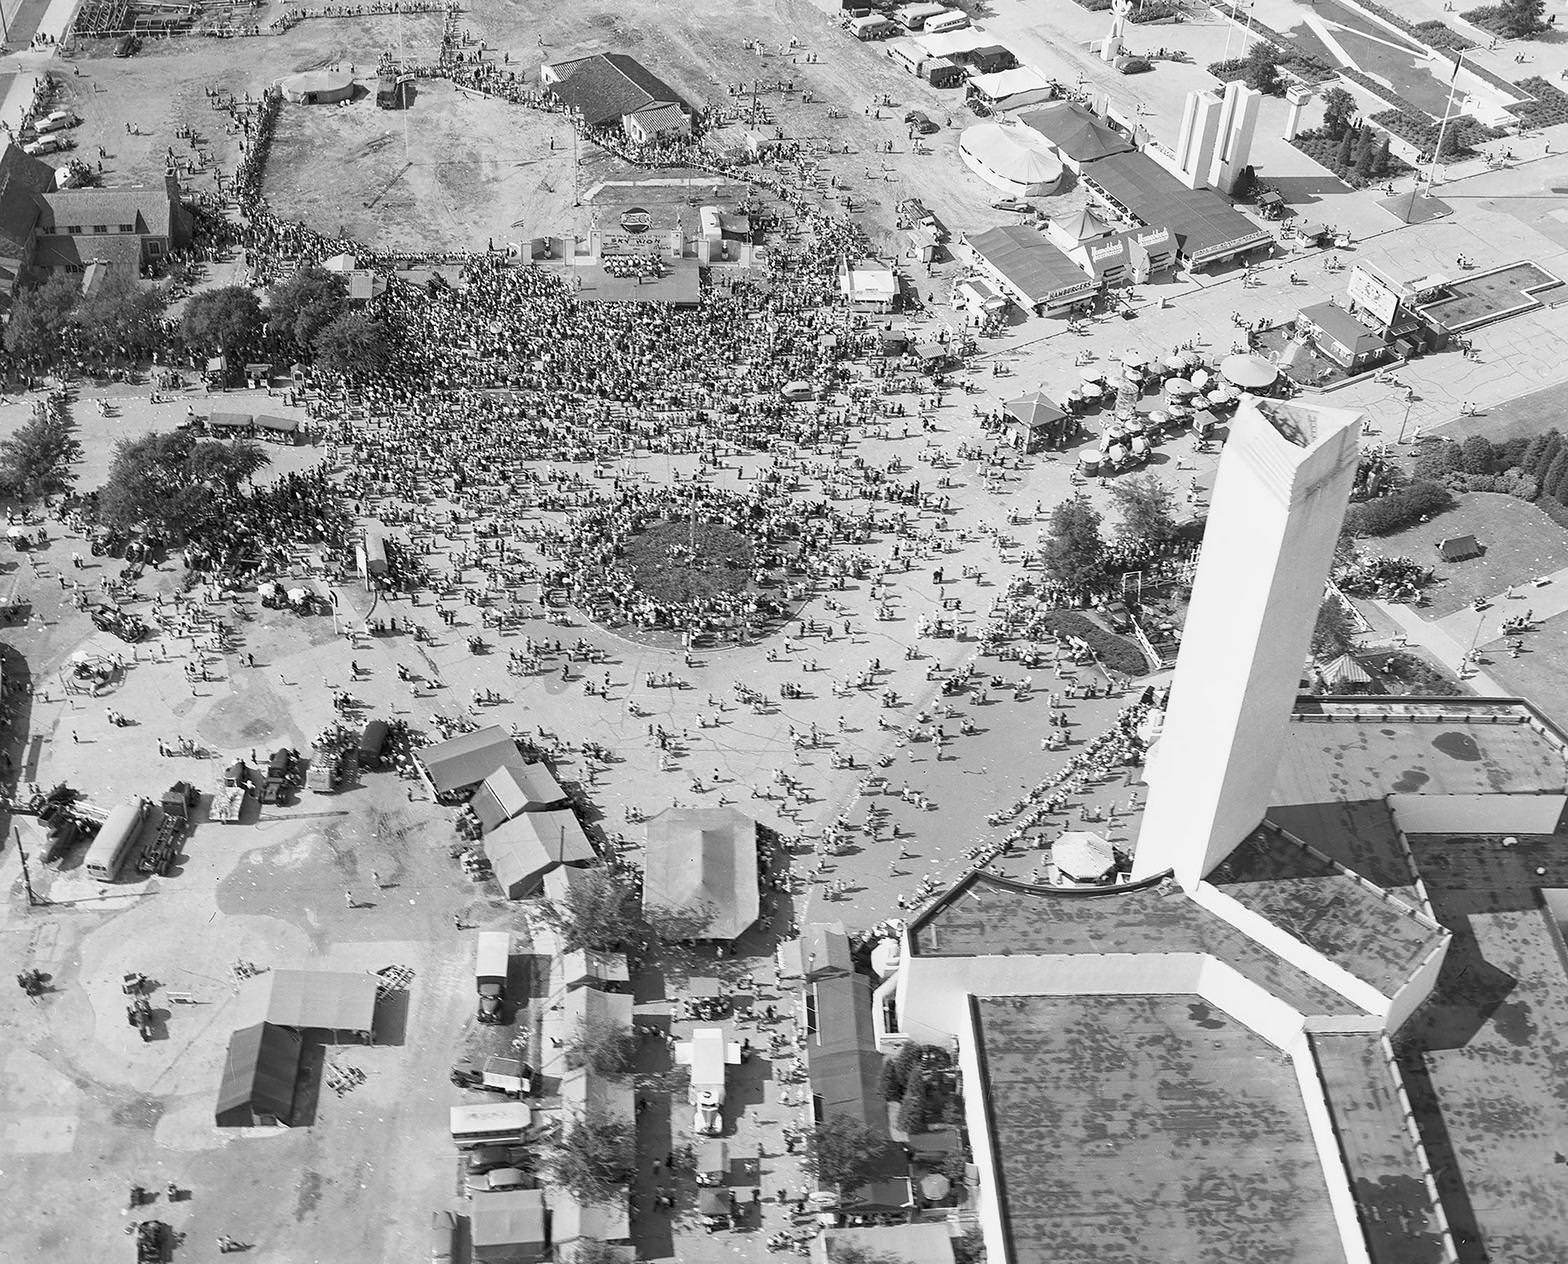 Aerial photograph of trapeze artists performing at Fair Park, Dallas, Texas, 1950